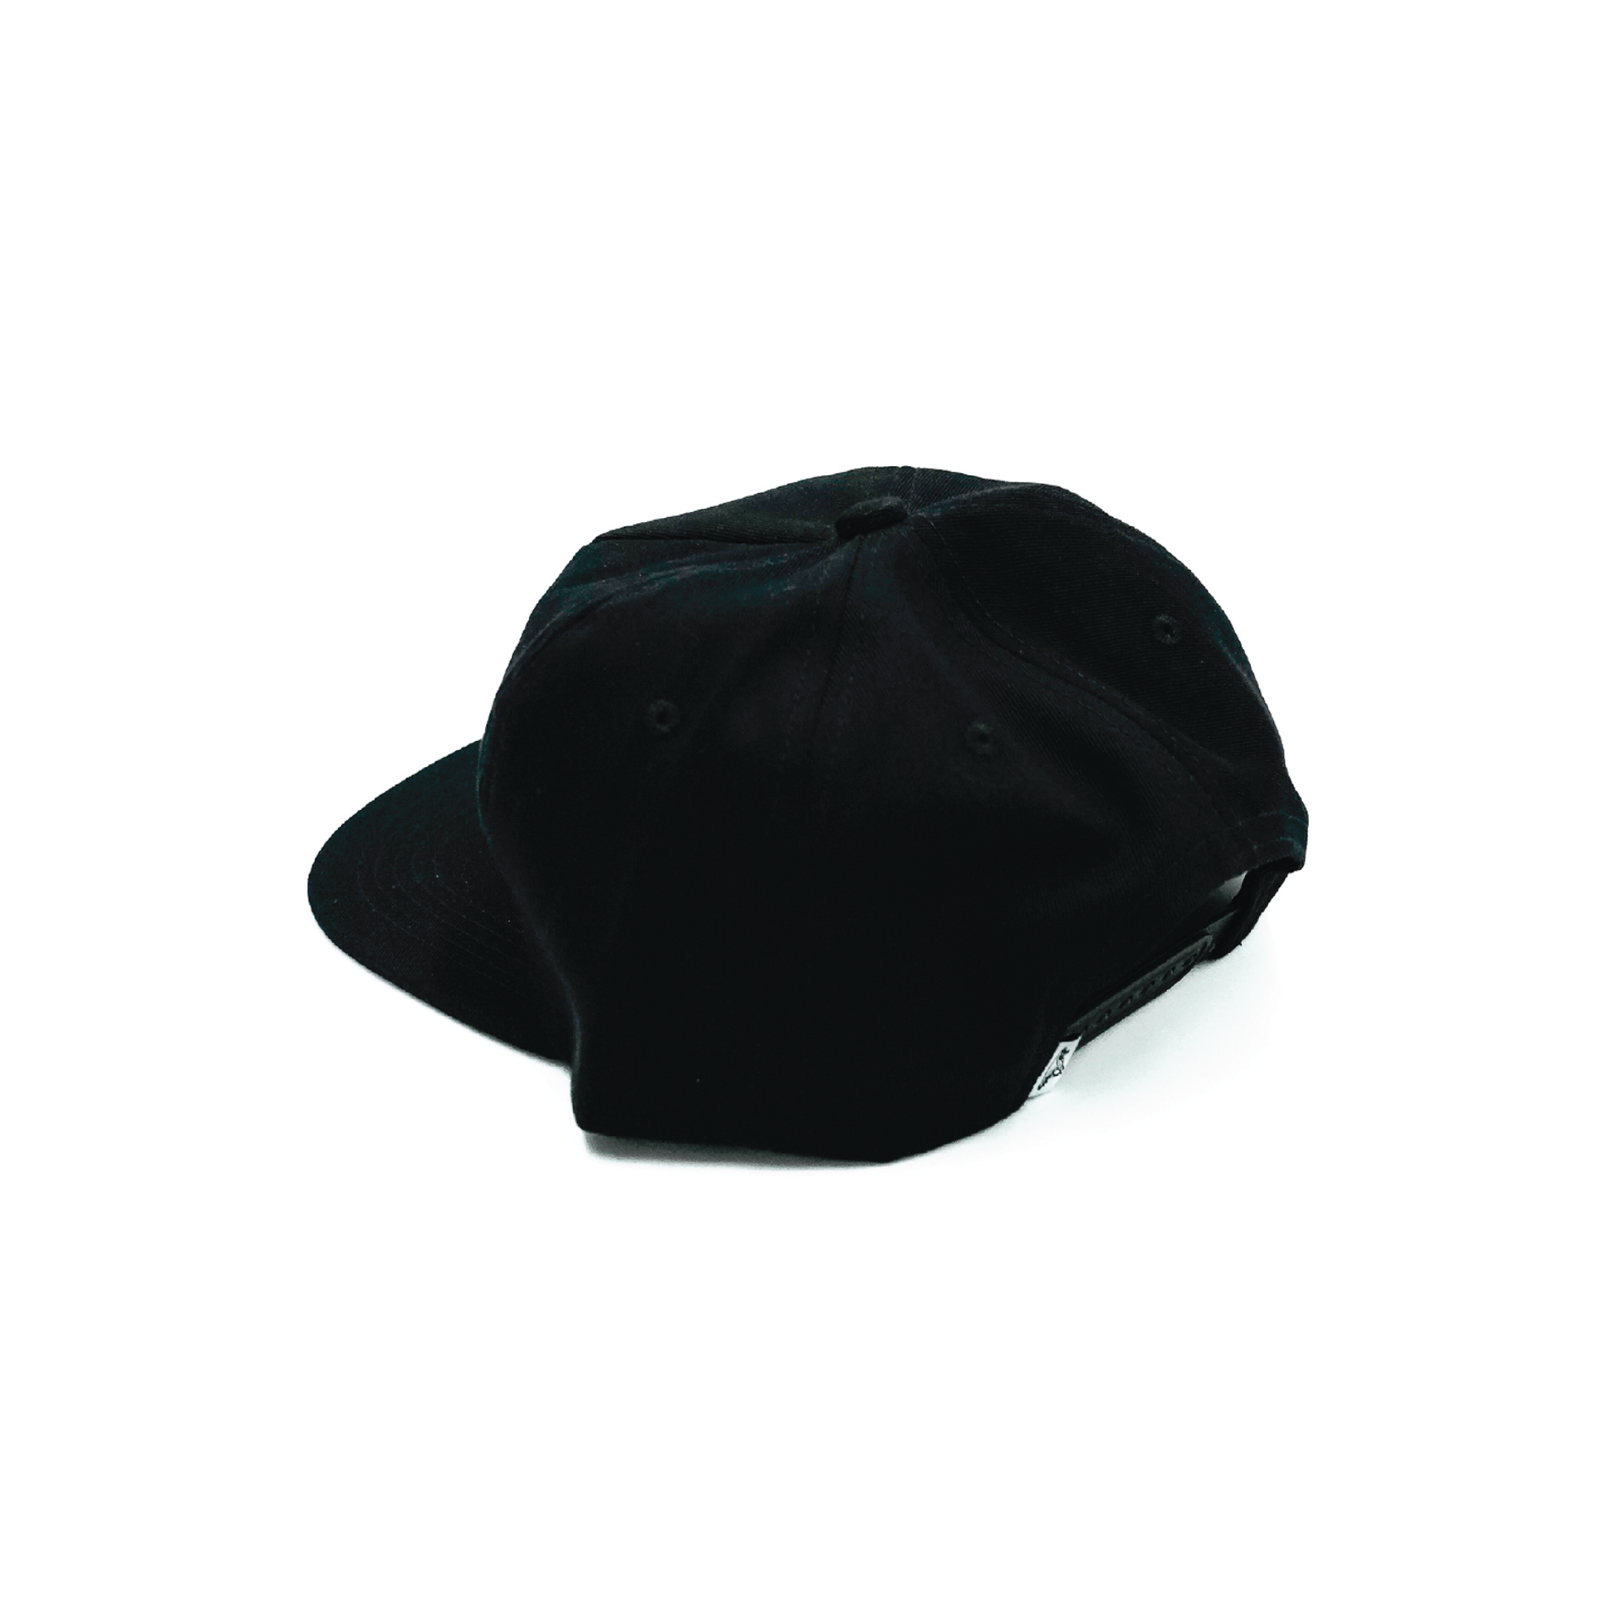 Thomas x McNeil Embroidered Hat Black